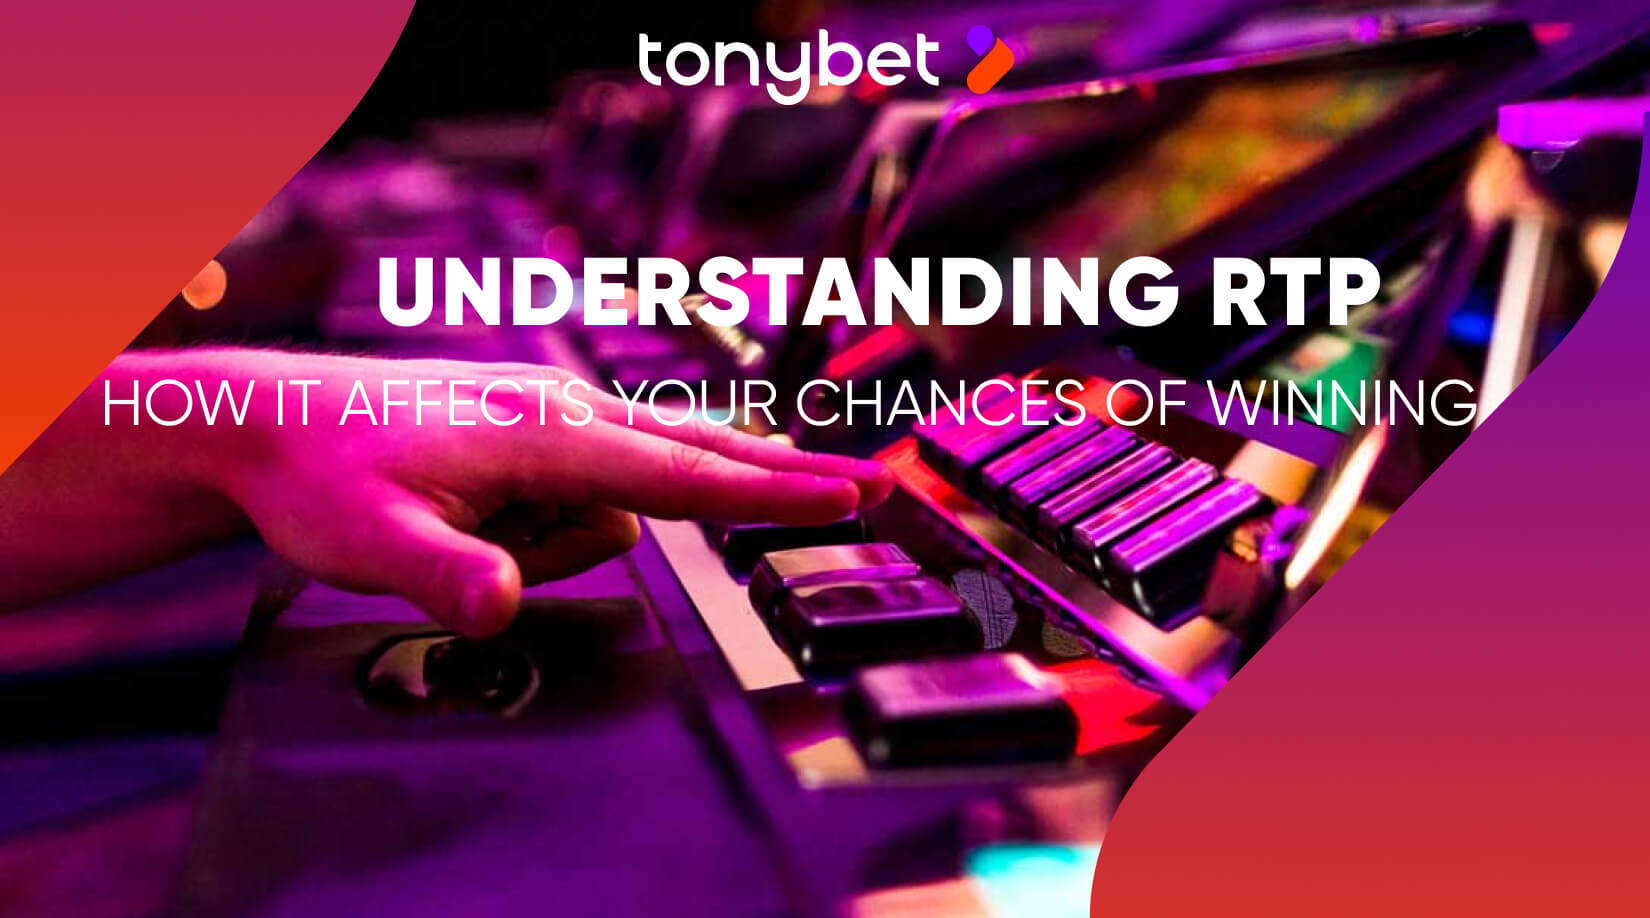 Understanding RTP (Return to Player): How it Affects Your Chances of Winning